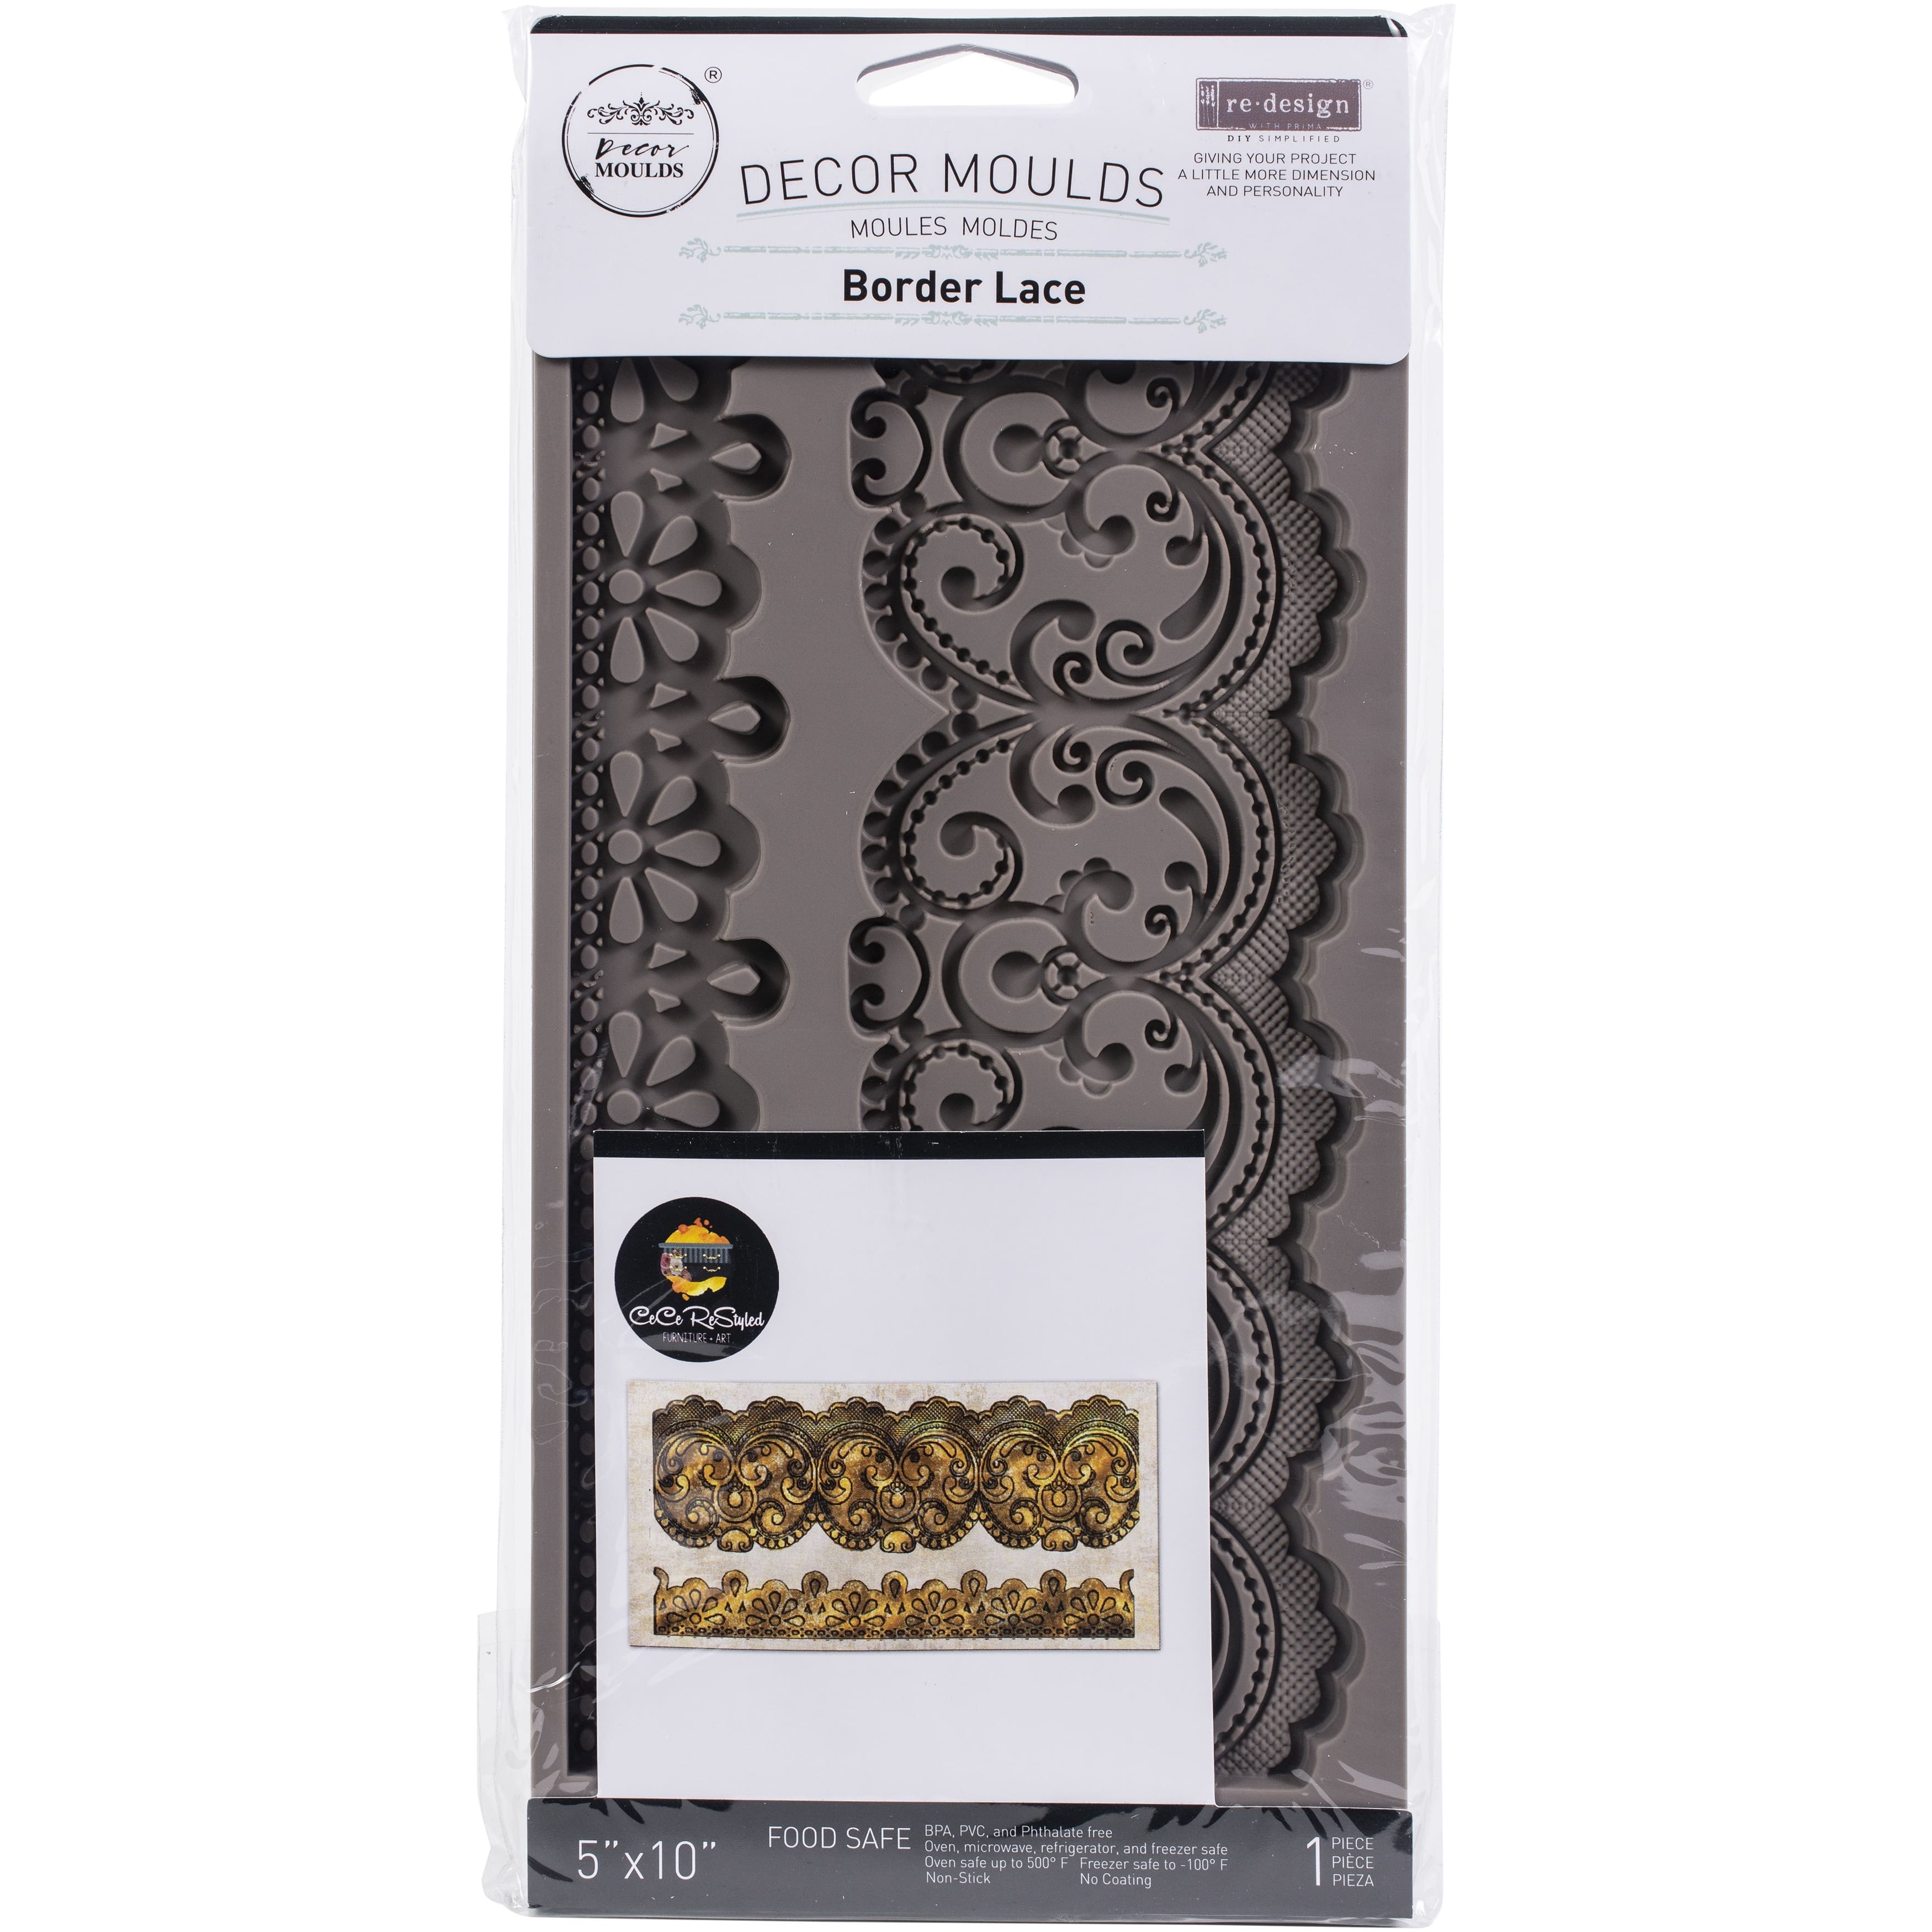 Sculpey Tools® Oven-Safe Lace Silicone Mold, Michaels